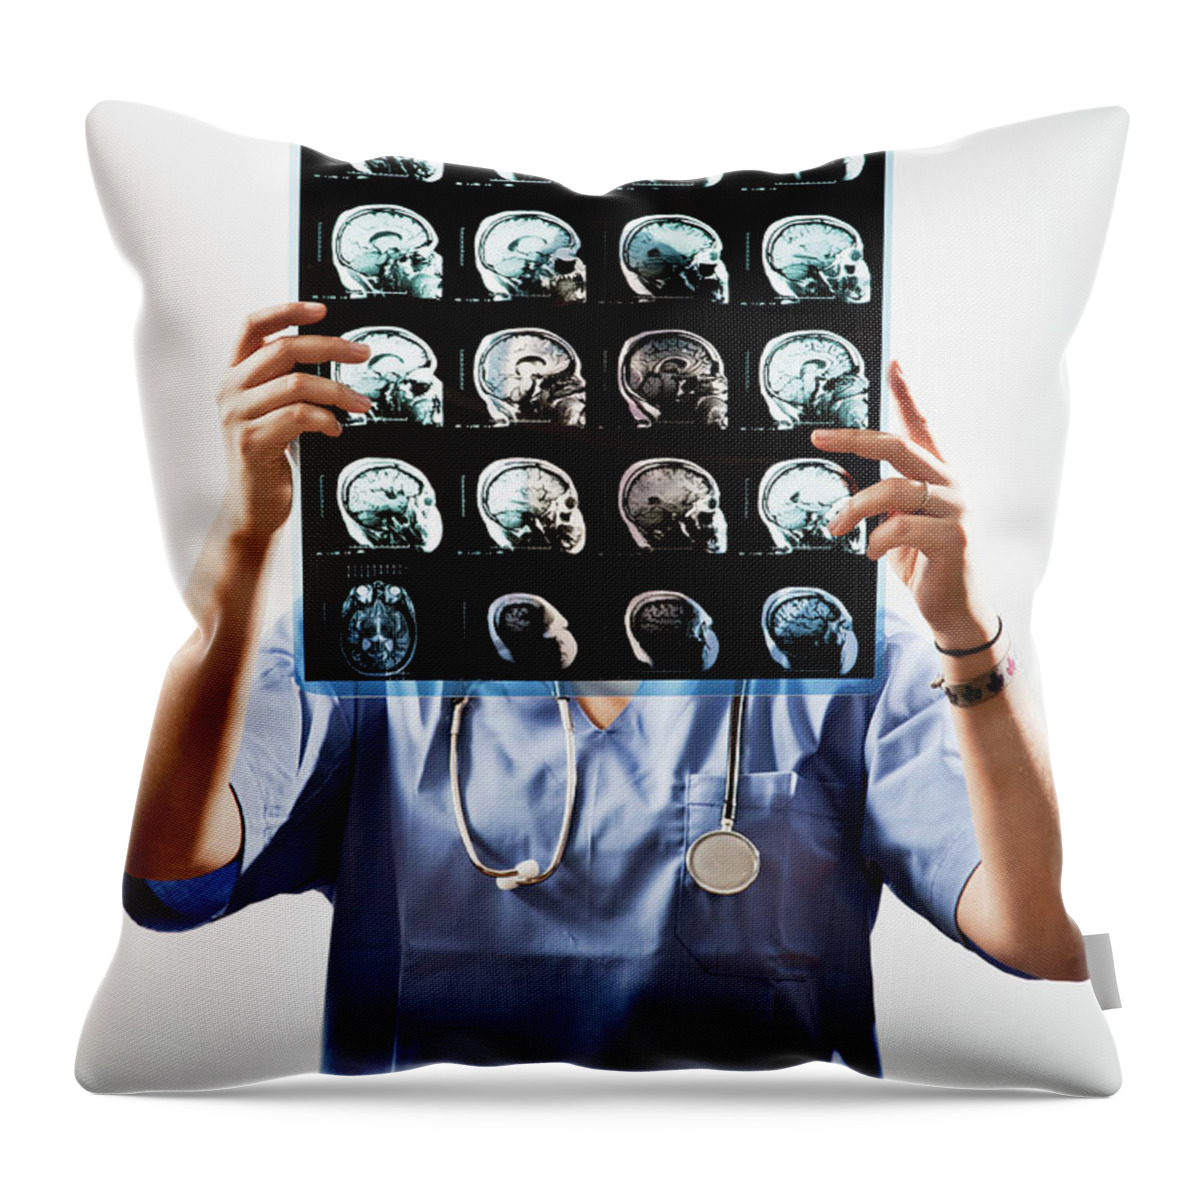 Expertise Throw Pillow featuring the photograph Female Doctor Holds Up Mri In Front Of by Ron Levine